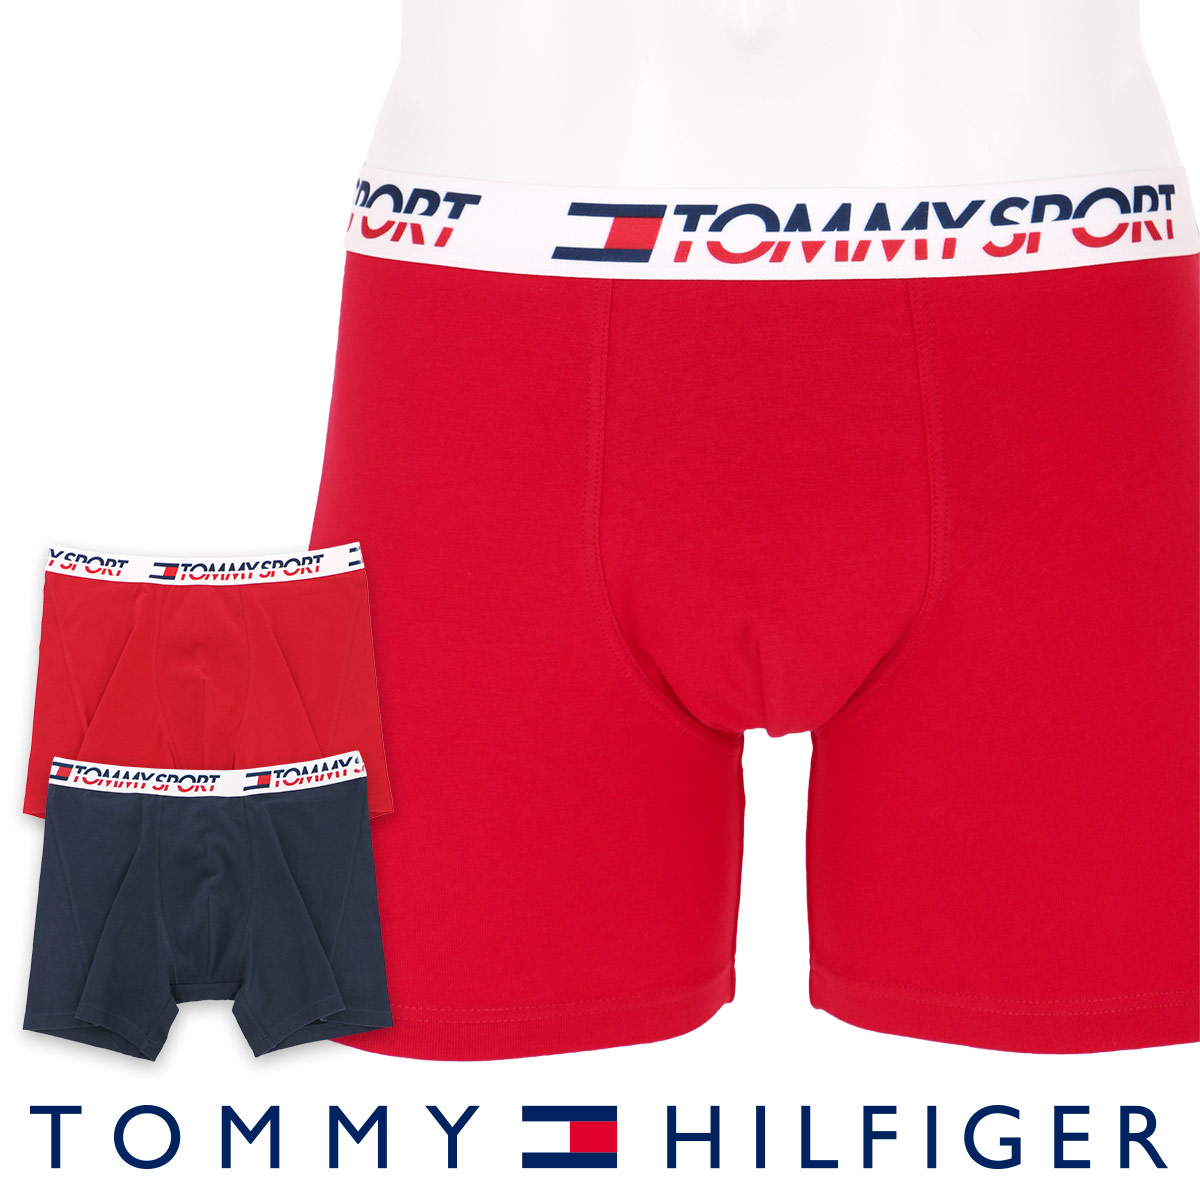 tommy hilfiger boxers sale, OFF 76 